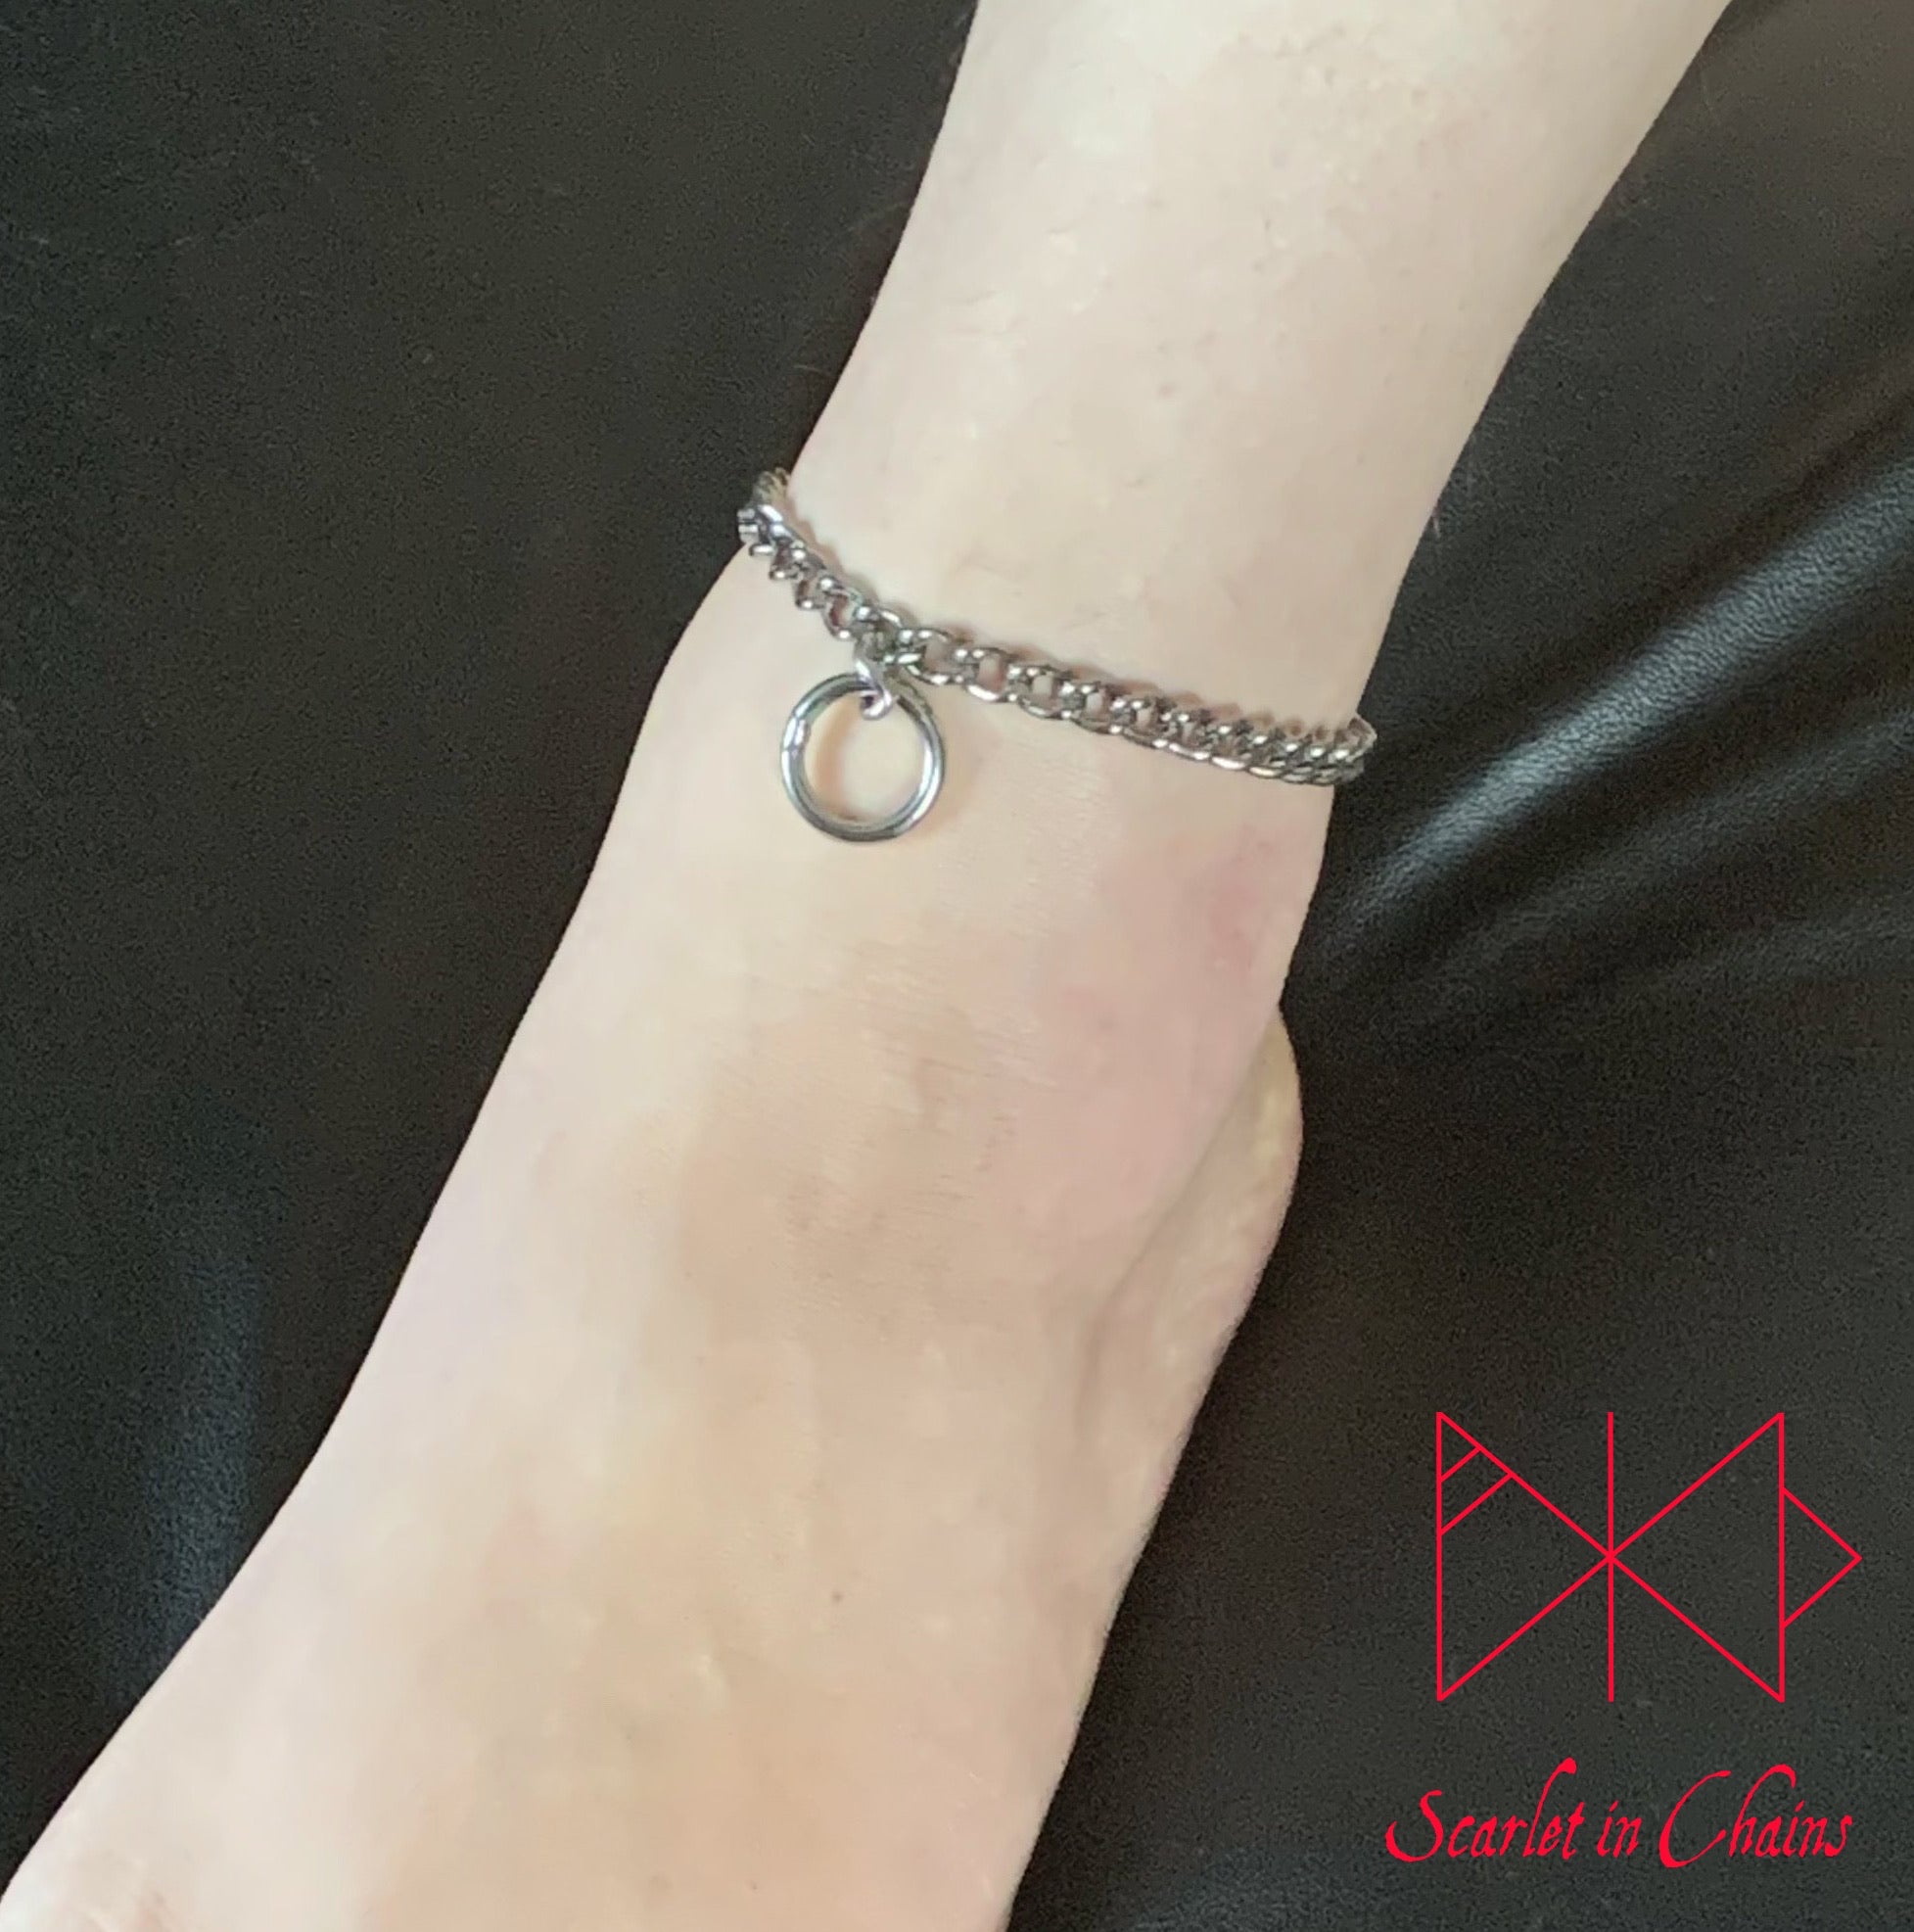 Micro Rockstar Anklet - Stainless Steel Anklet - Shown Warn